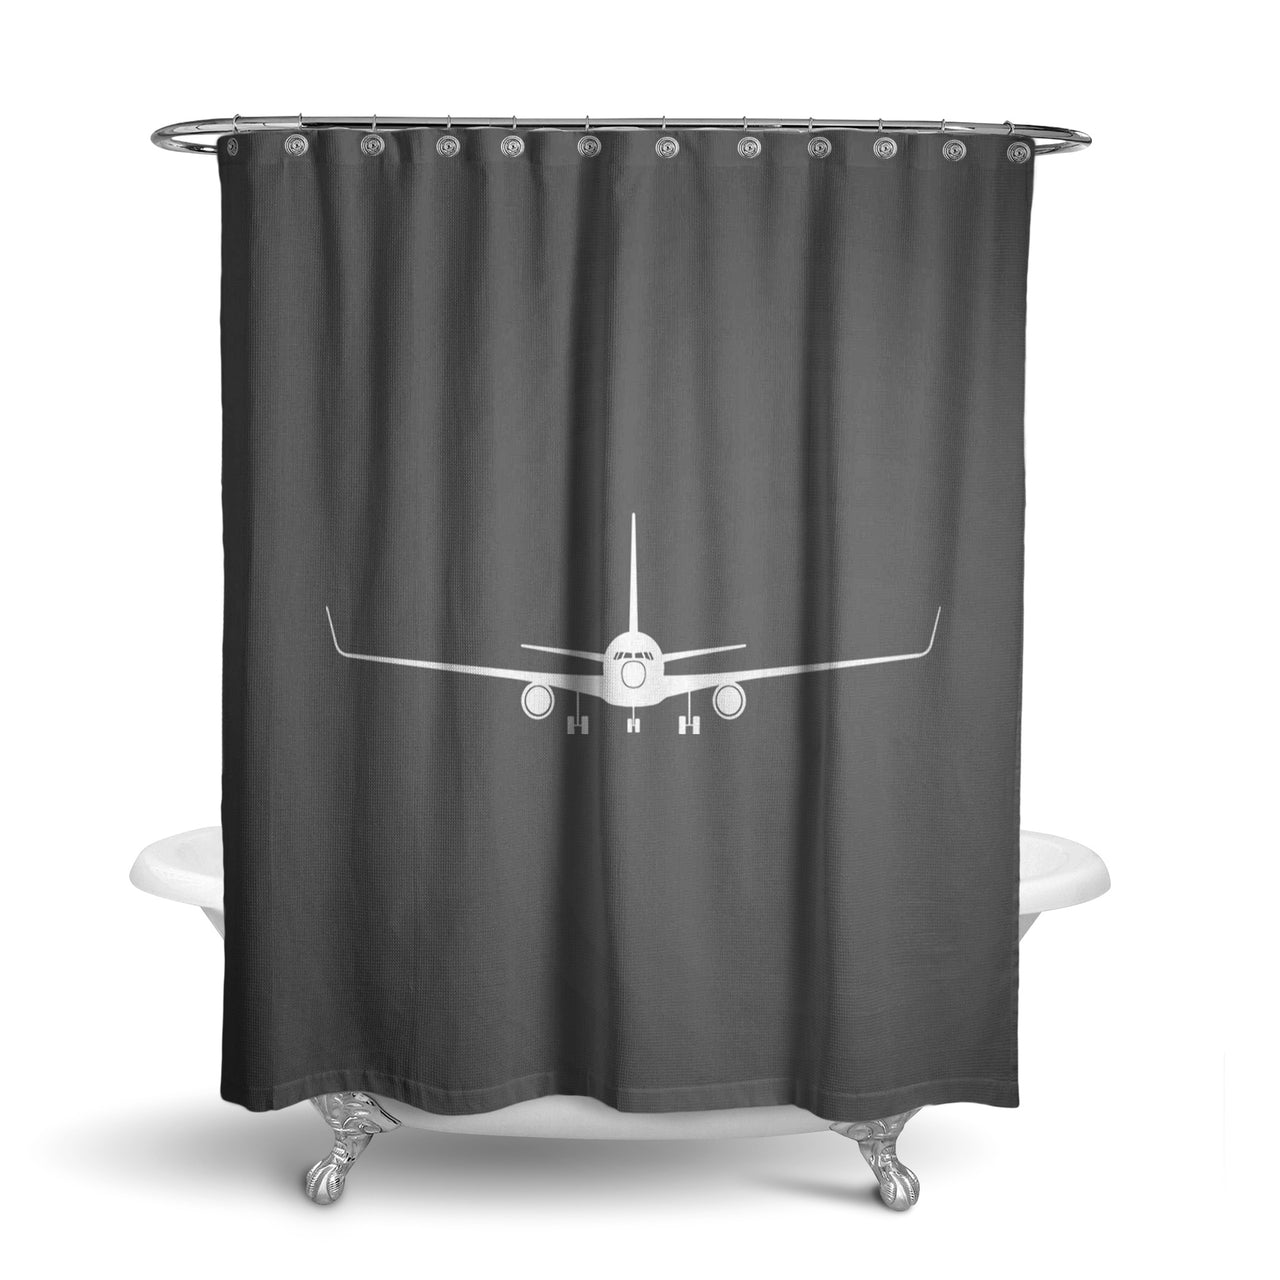 Boeing 767 Silhouette Designed Shower Curtains